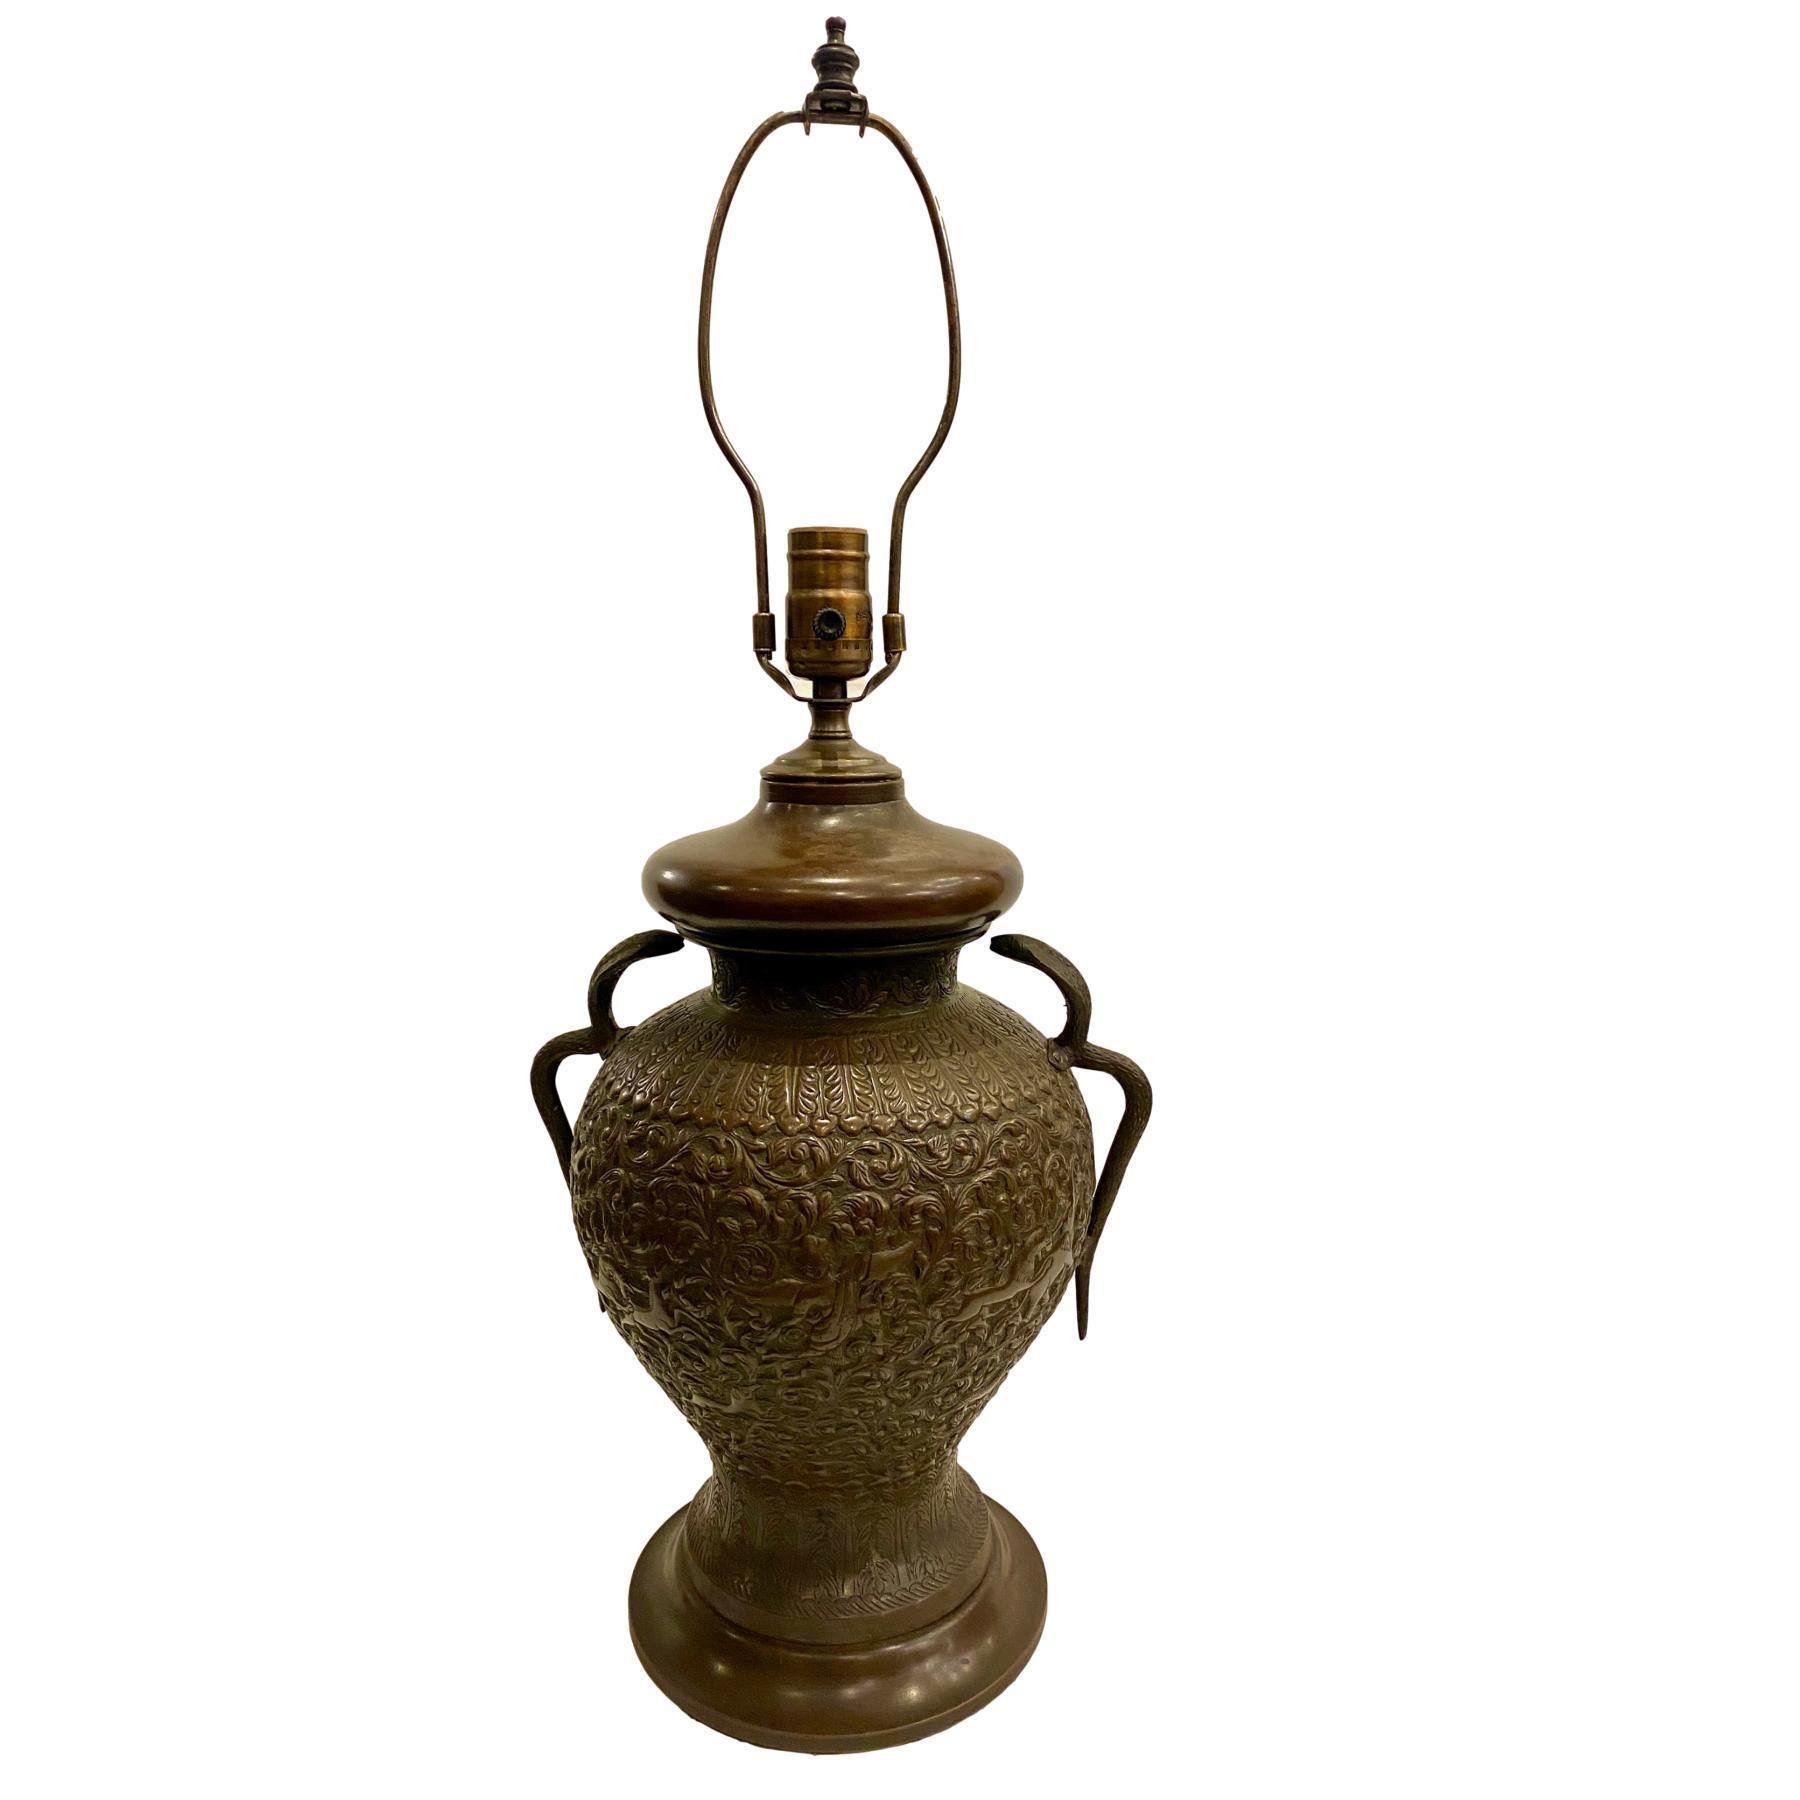  Anglo-Indian Hammered Brass Lamp 2